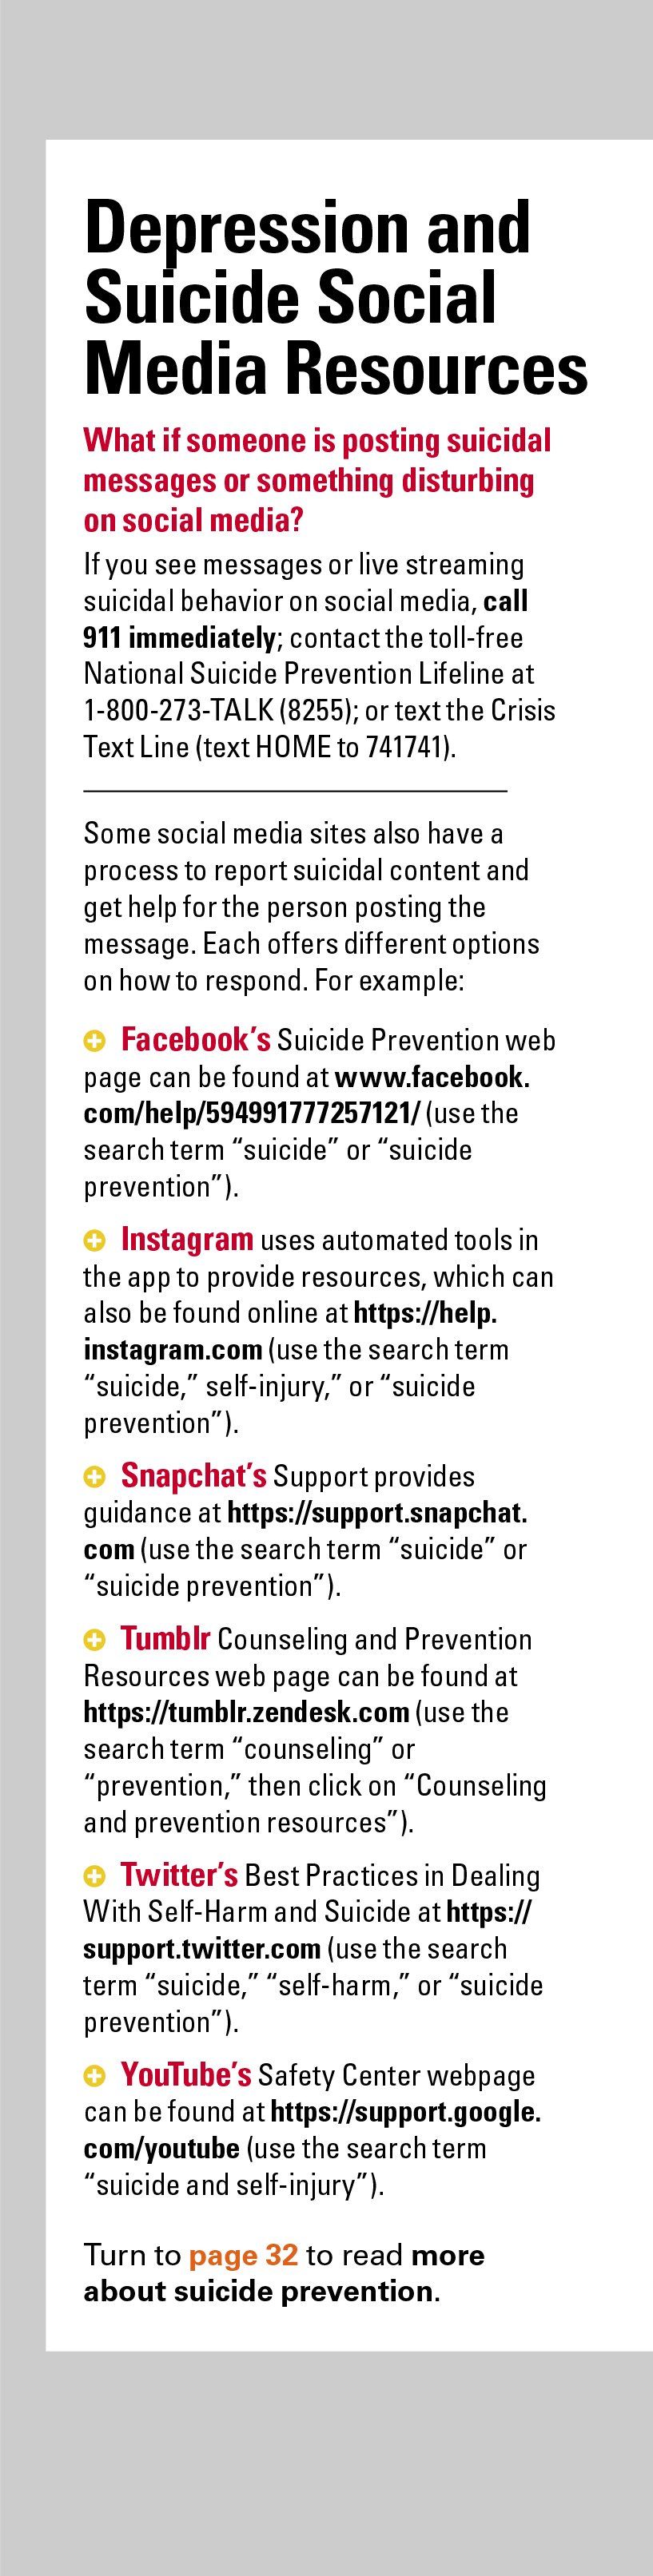 Depression and suicide social media resources